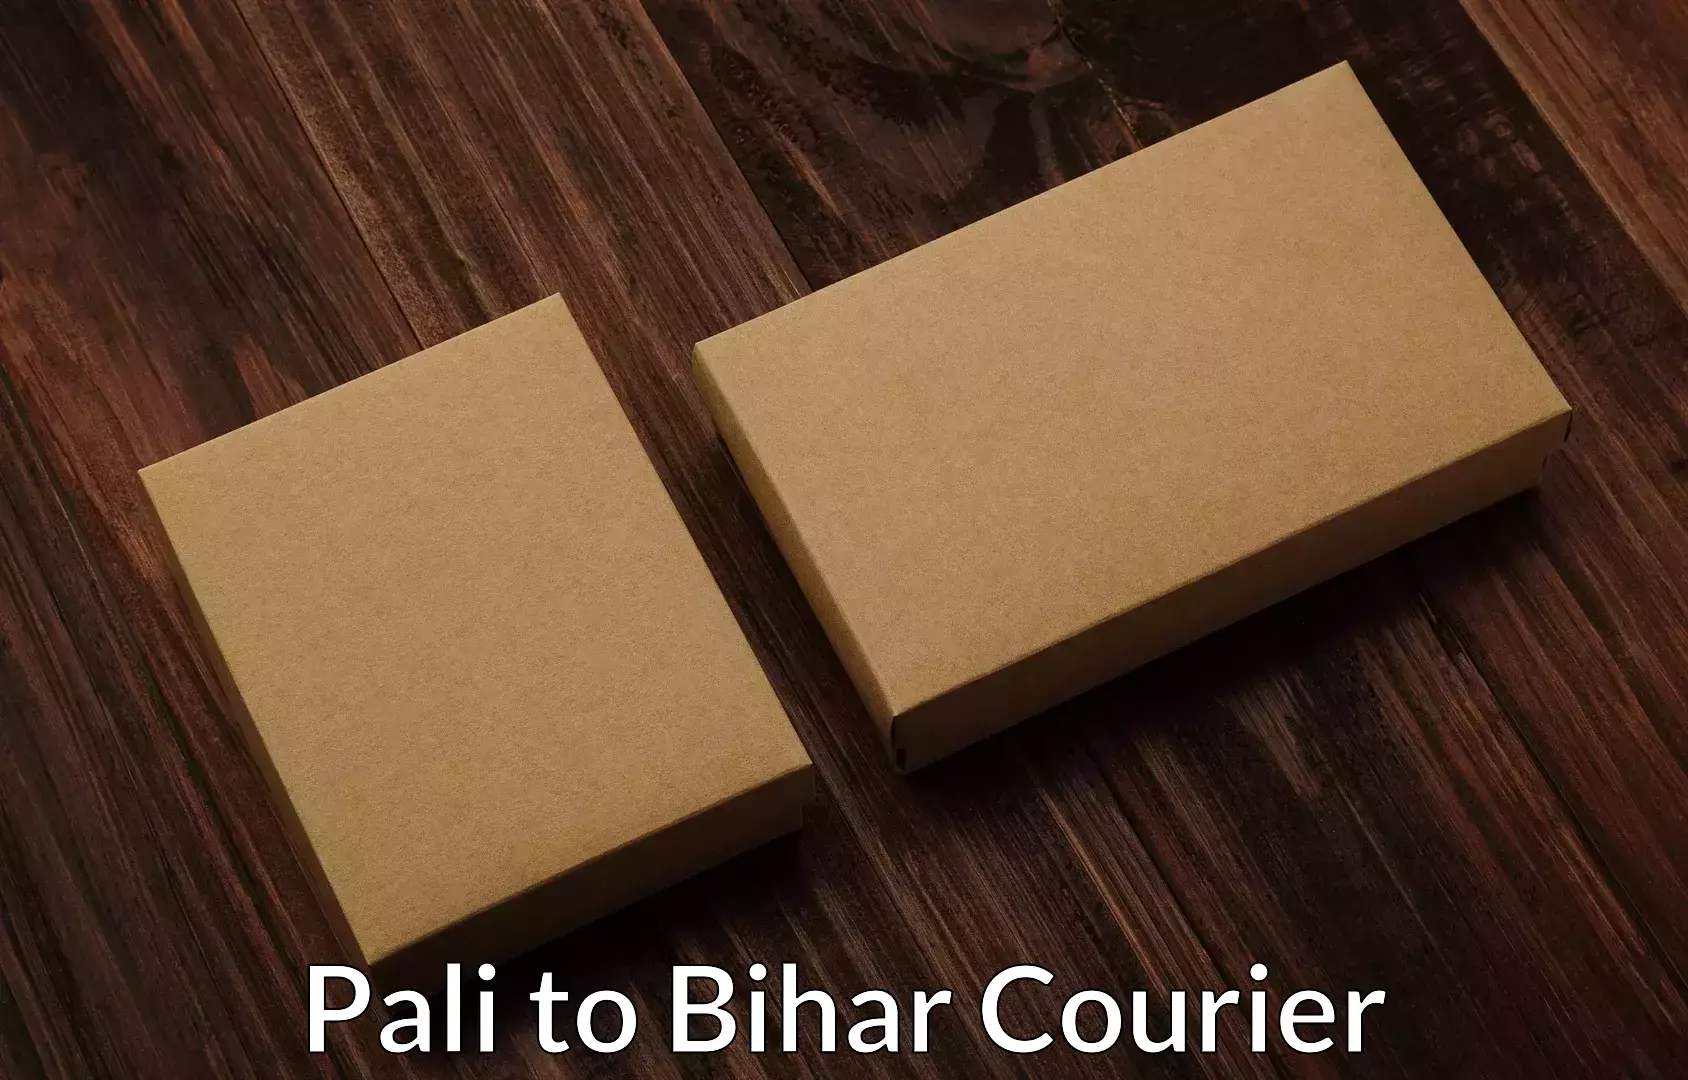 Furniture delivery service Pali to Bihar